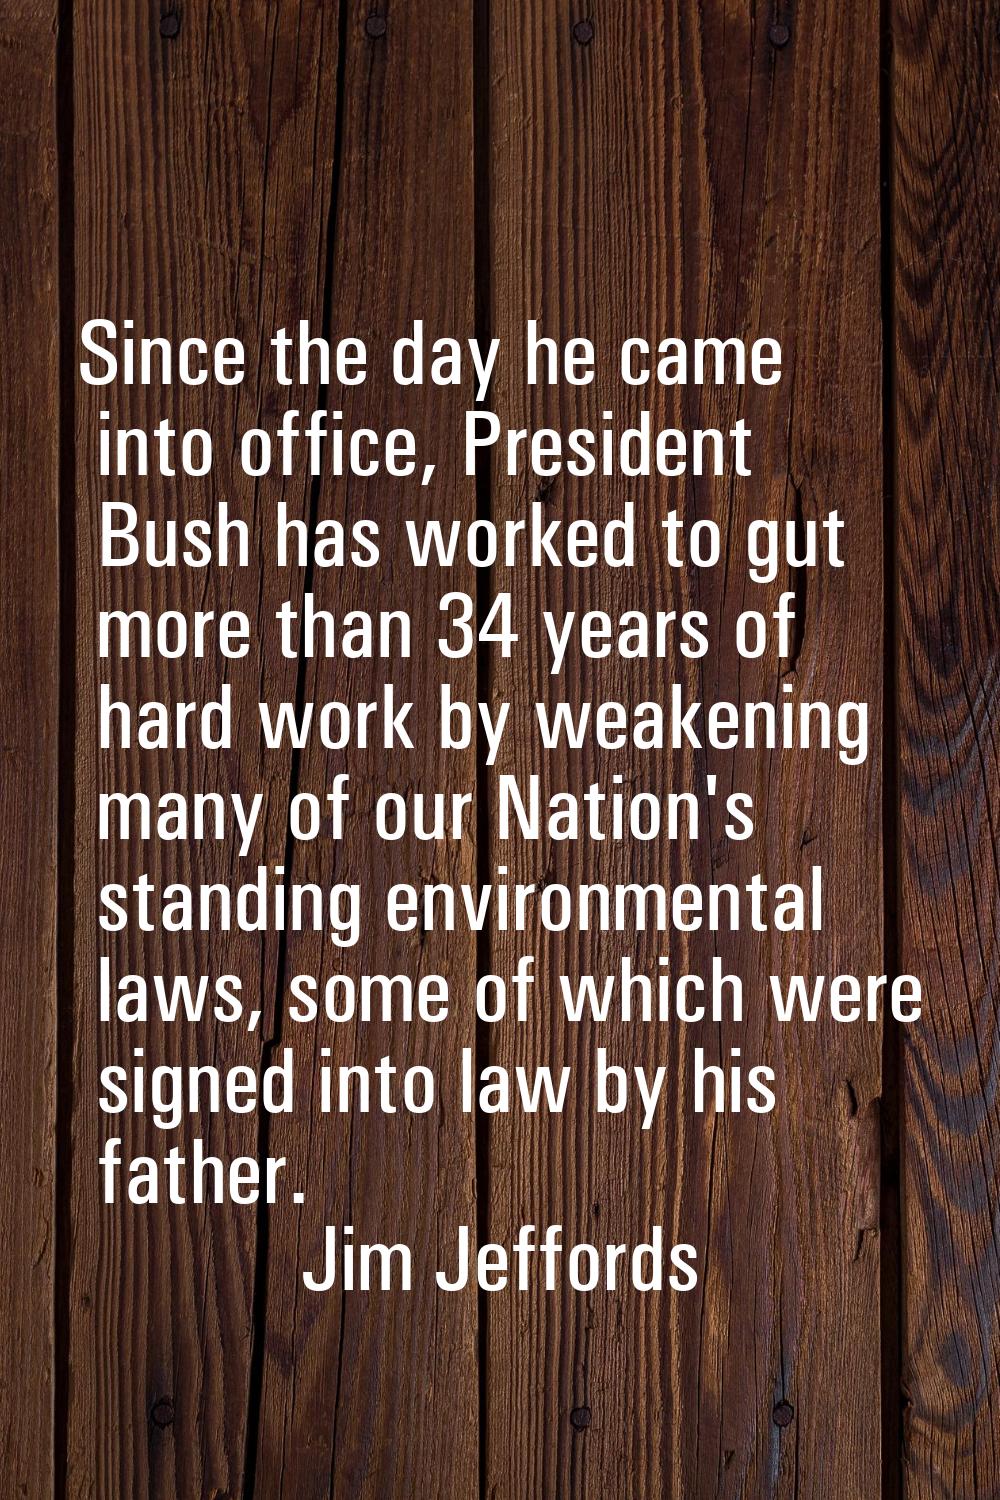 Since the day he came into office, President Bush has worked to gut more than 34 years of hard work